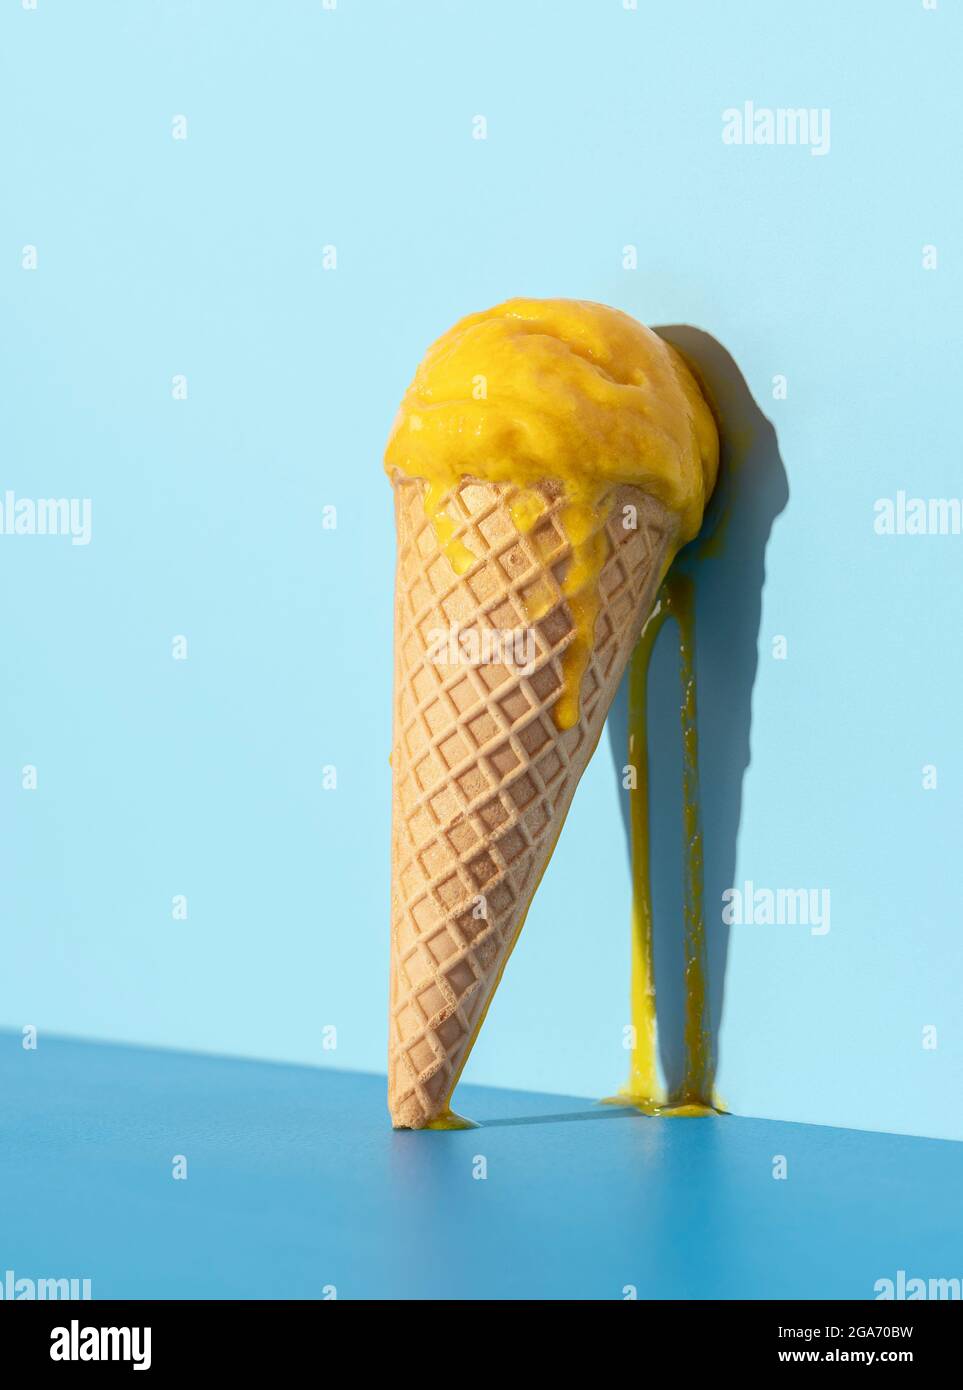 Melted Mango Ice Cream Dripping On A Blue Wall Mango Ice Cream In A Waffle Cone In Bright Light 8003